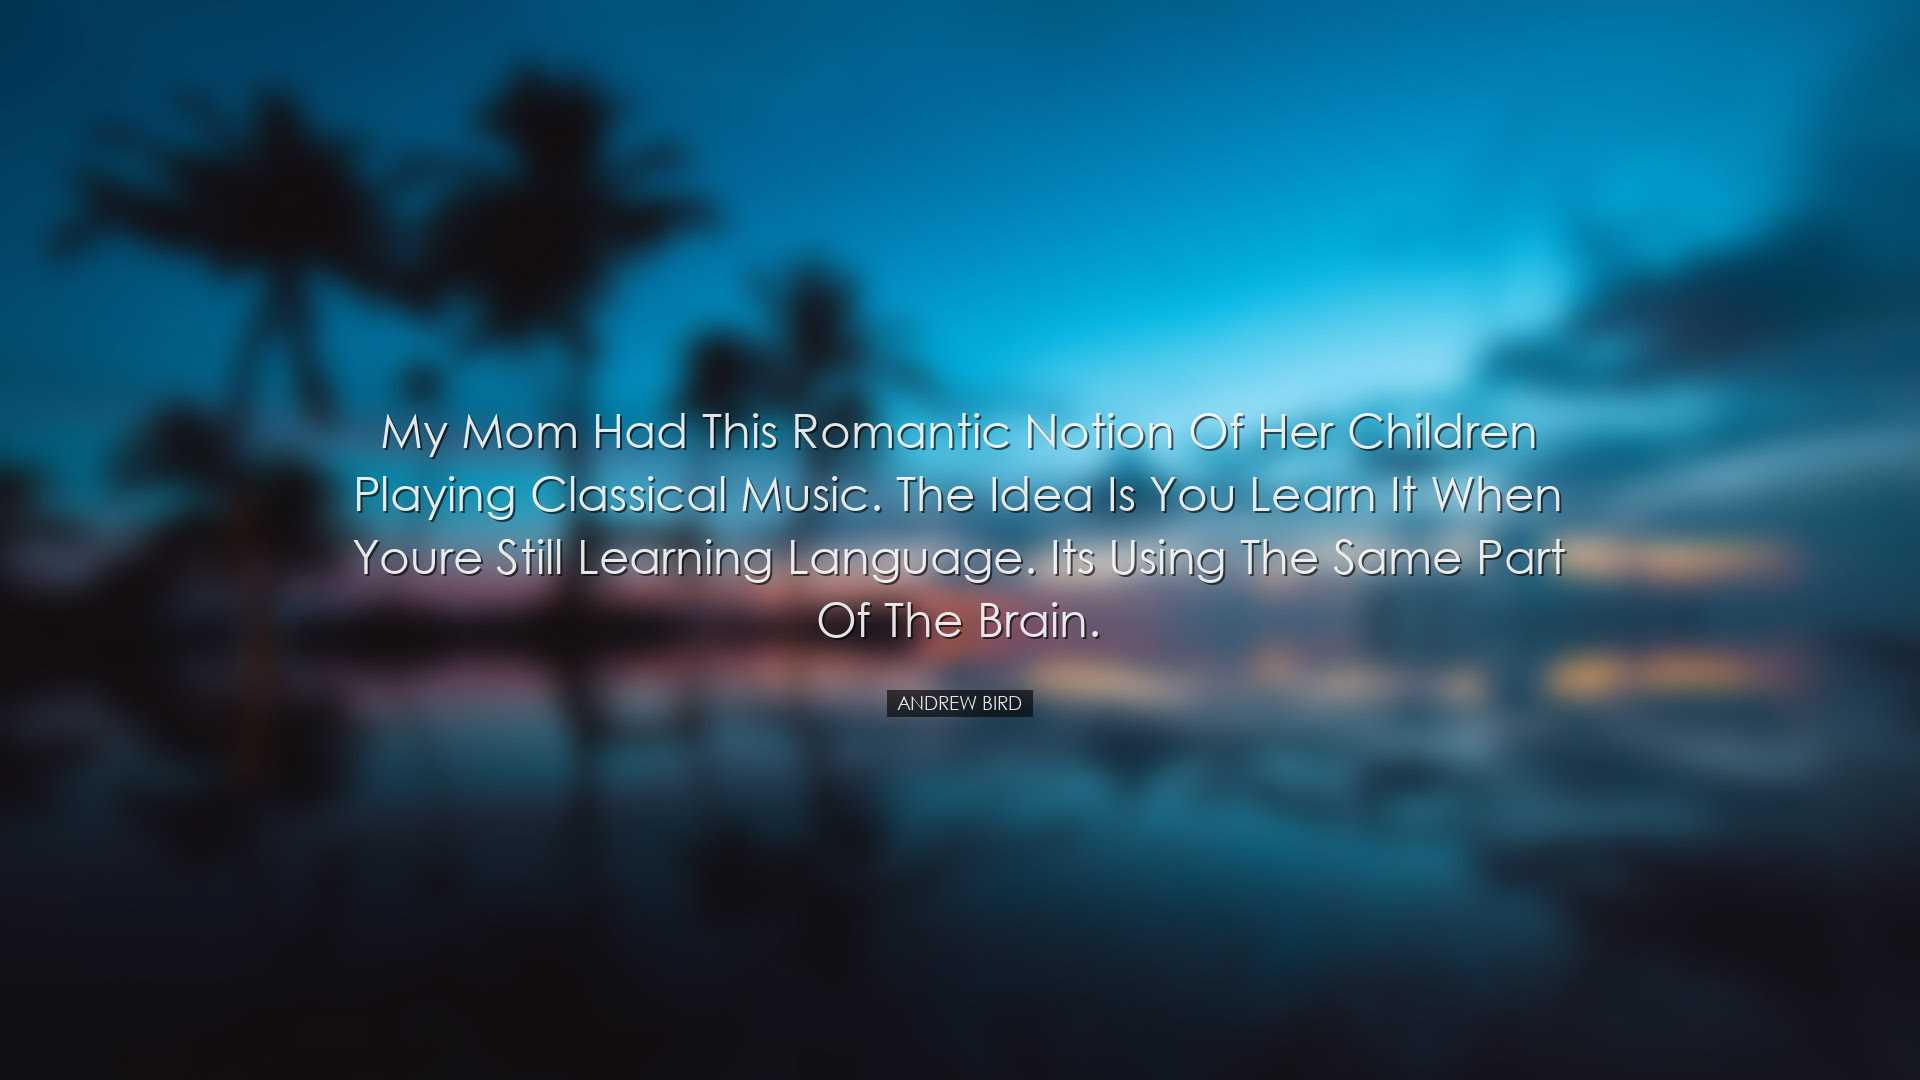 My mom had this romantic notion of her children playing classical